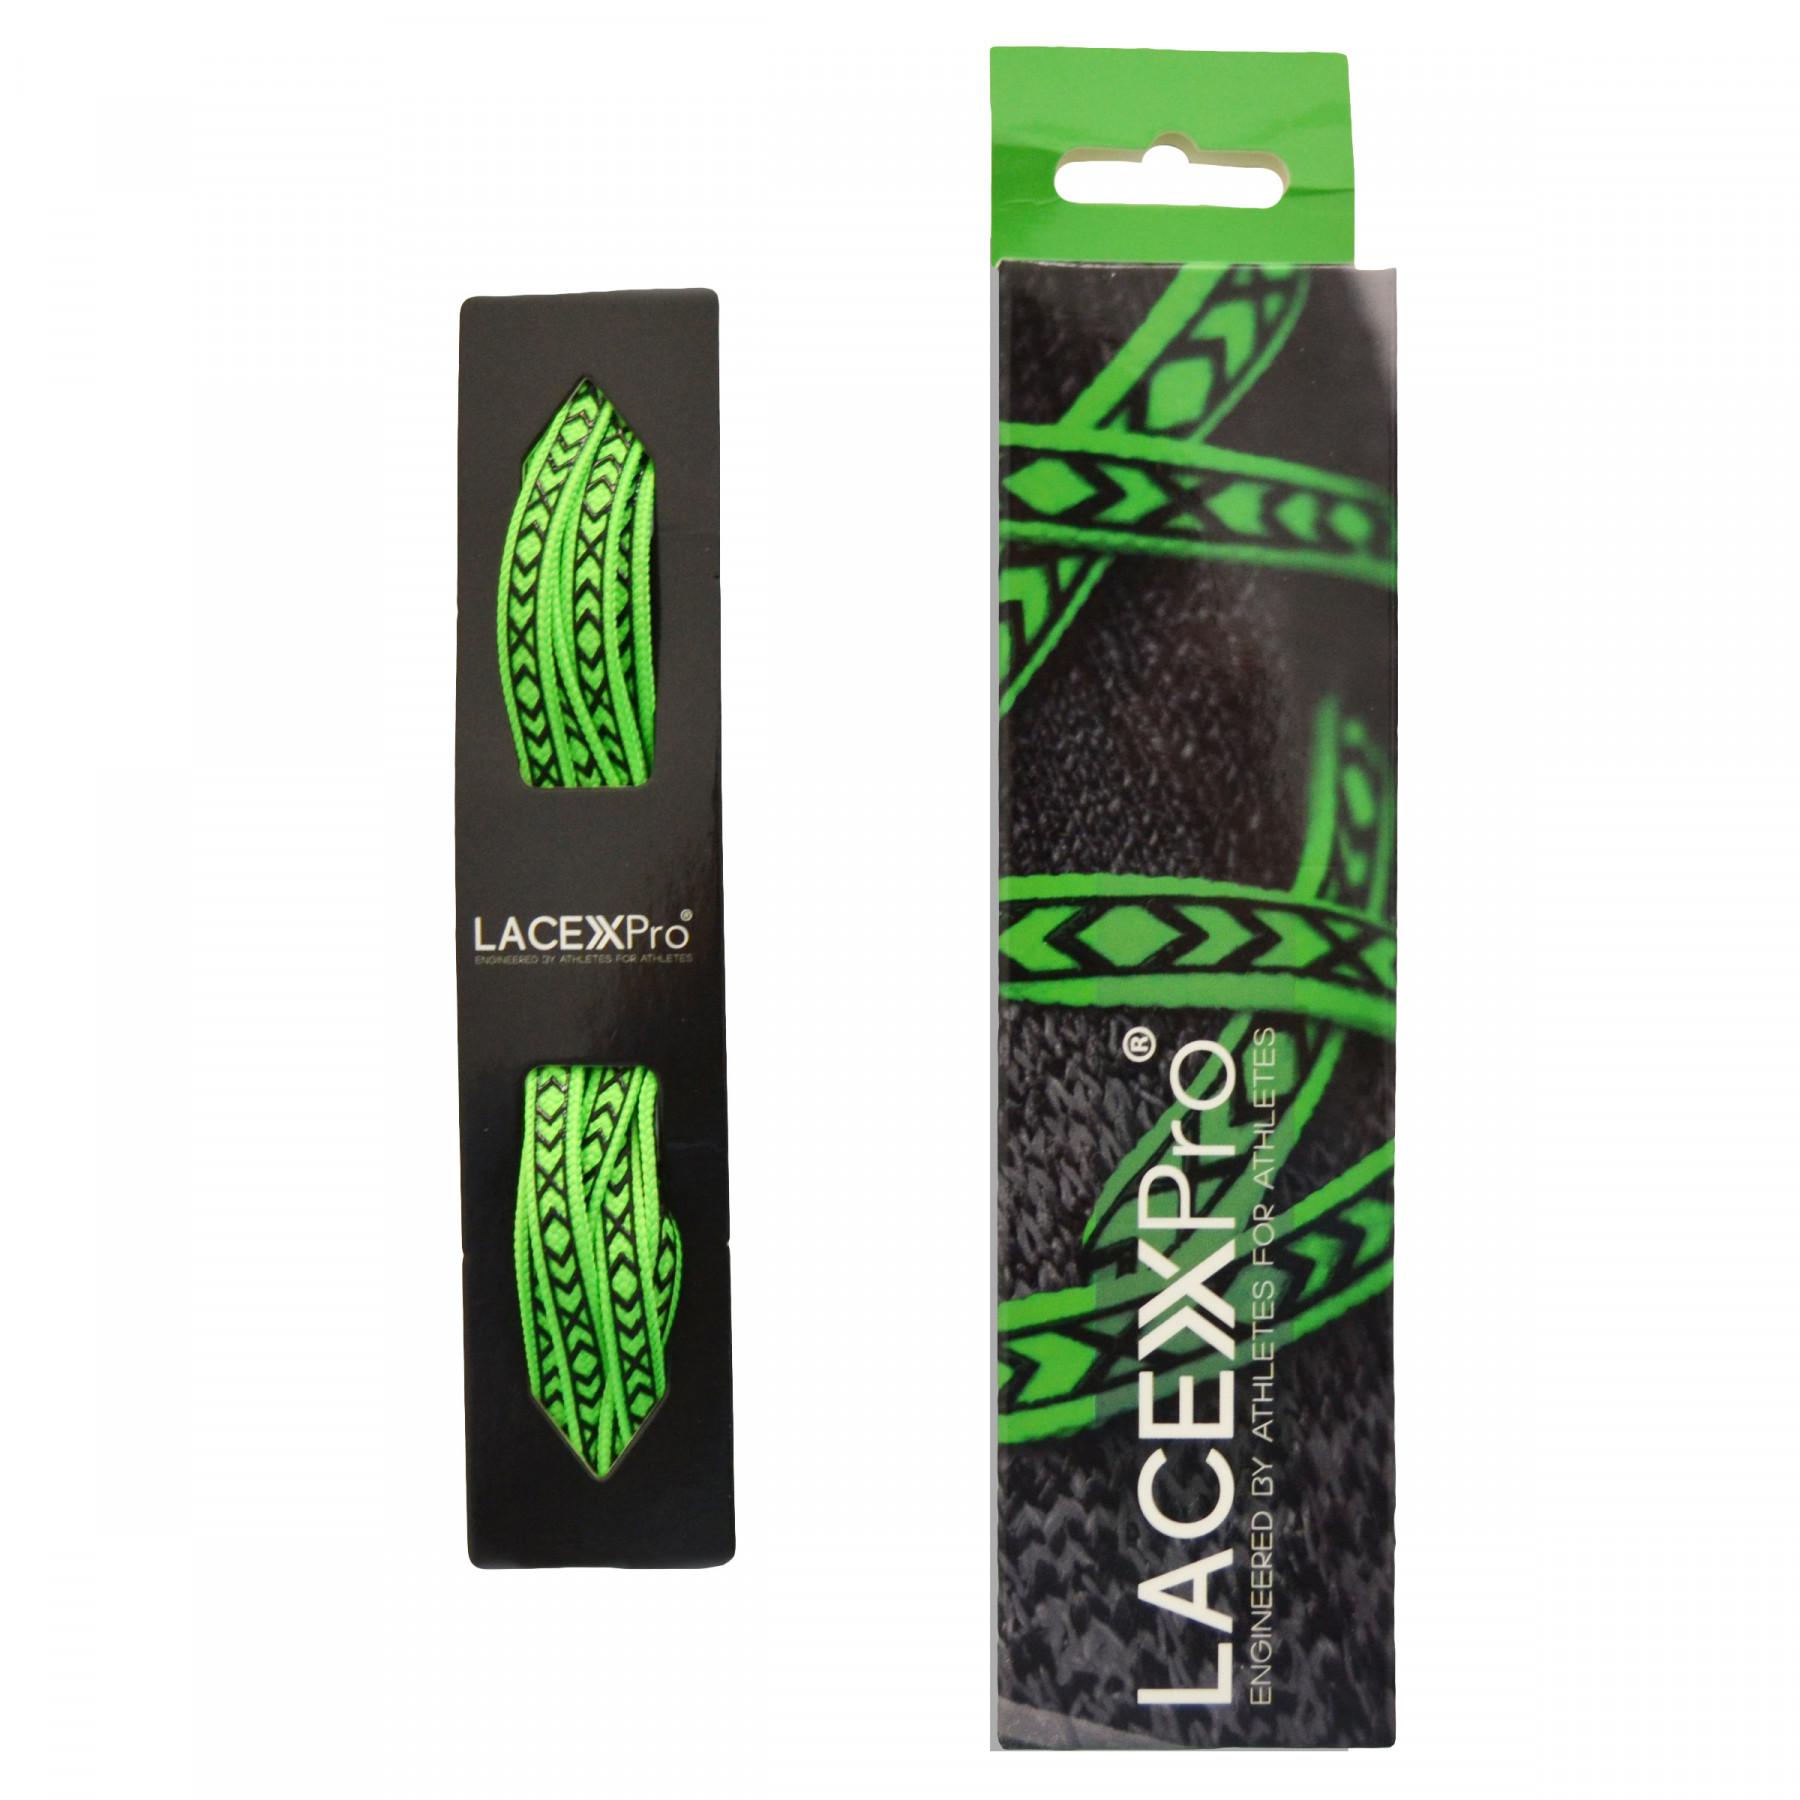 Veters Lacex Pro Grip groen